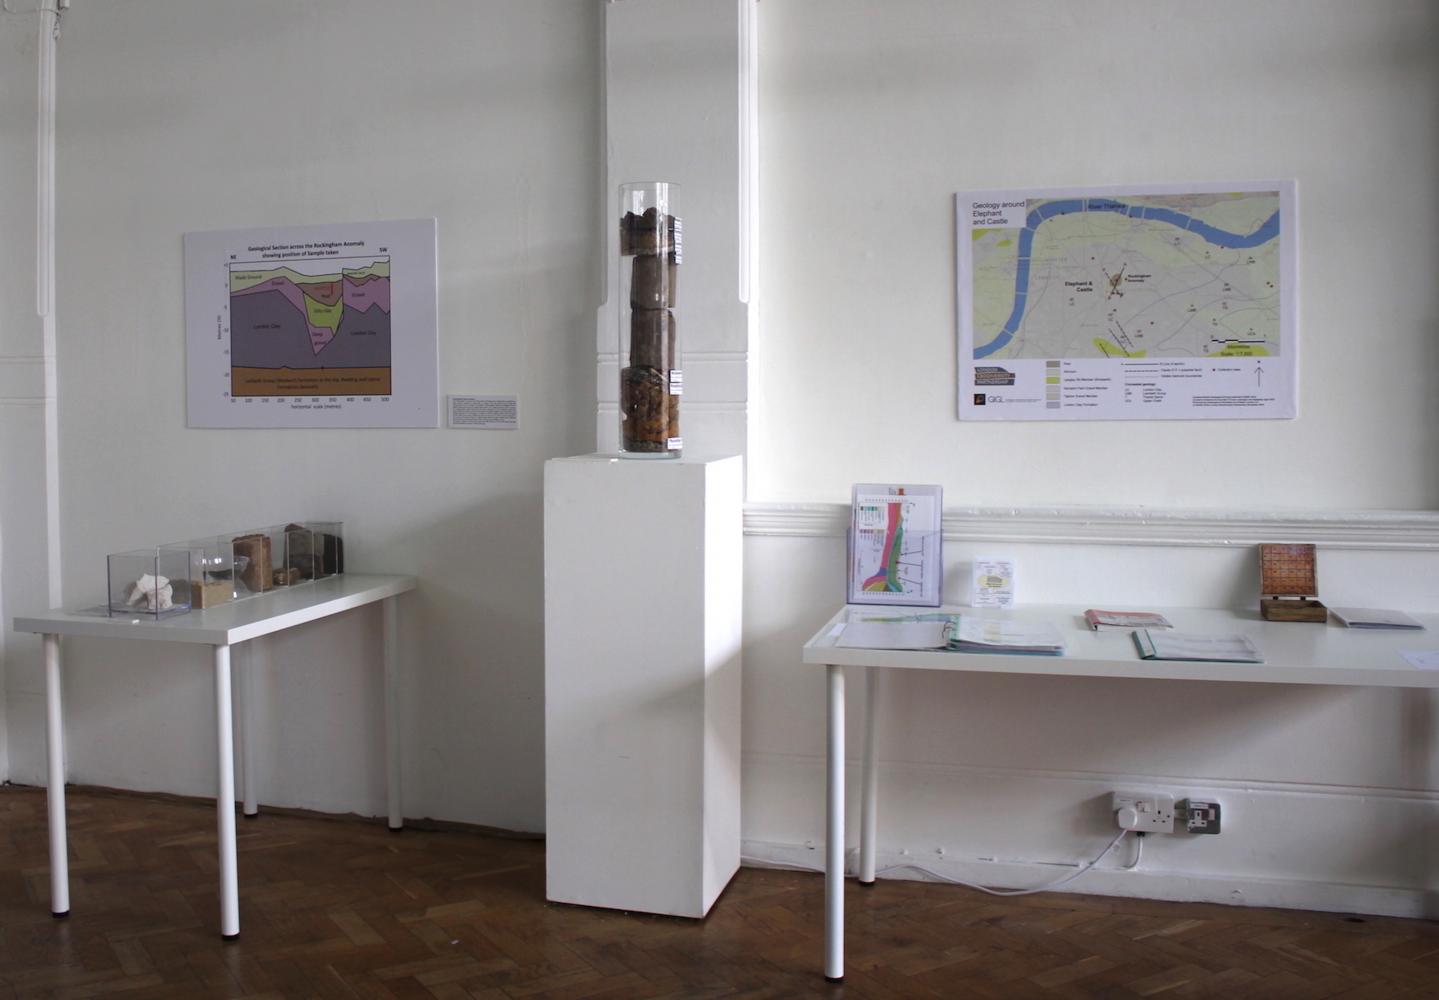 A London Geodiversity Partnership display for 'Core Sample' a previous Exhibition based on the community, art and geology.